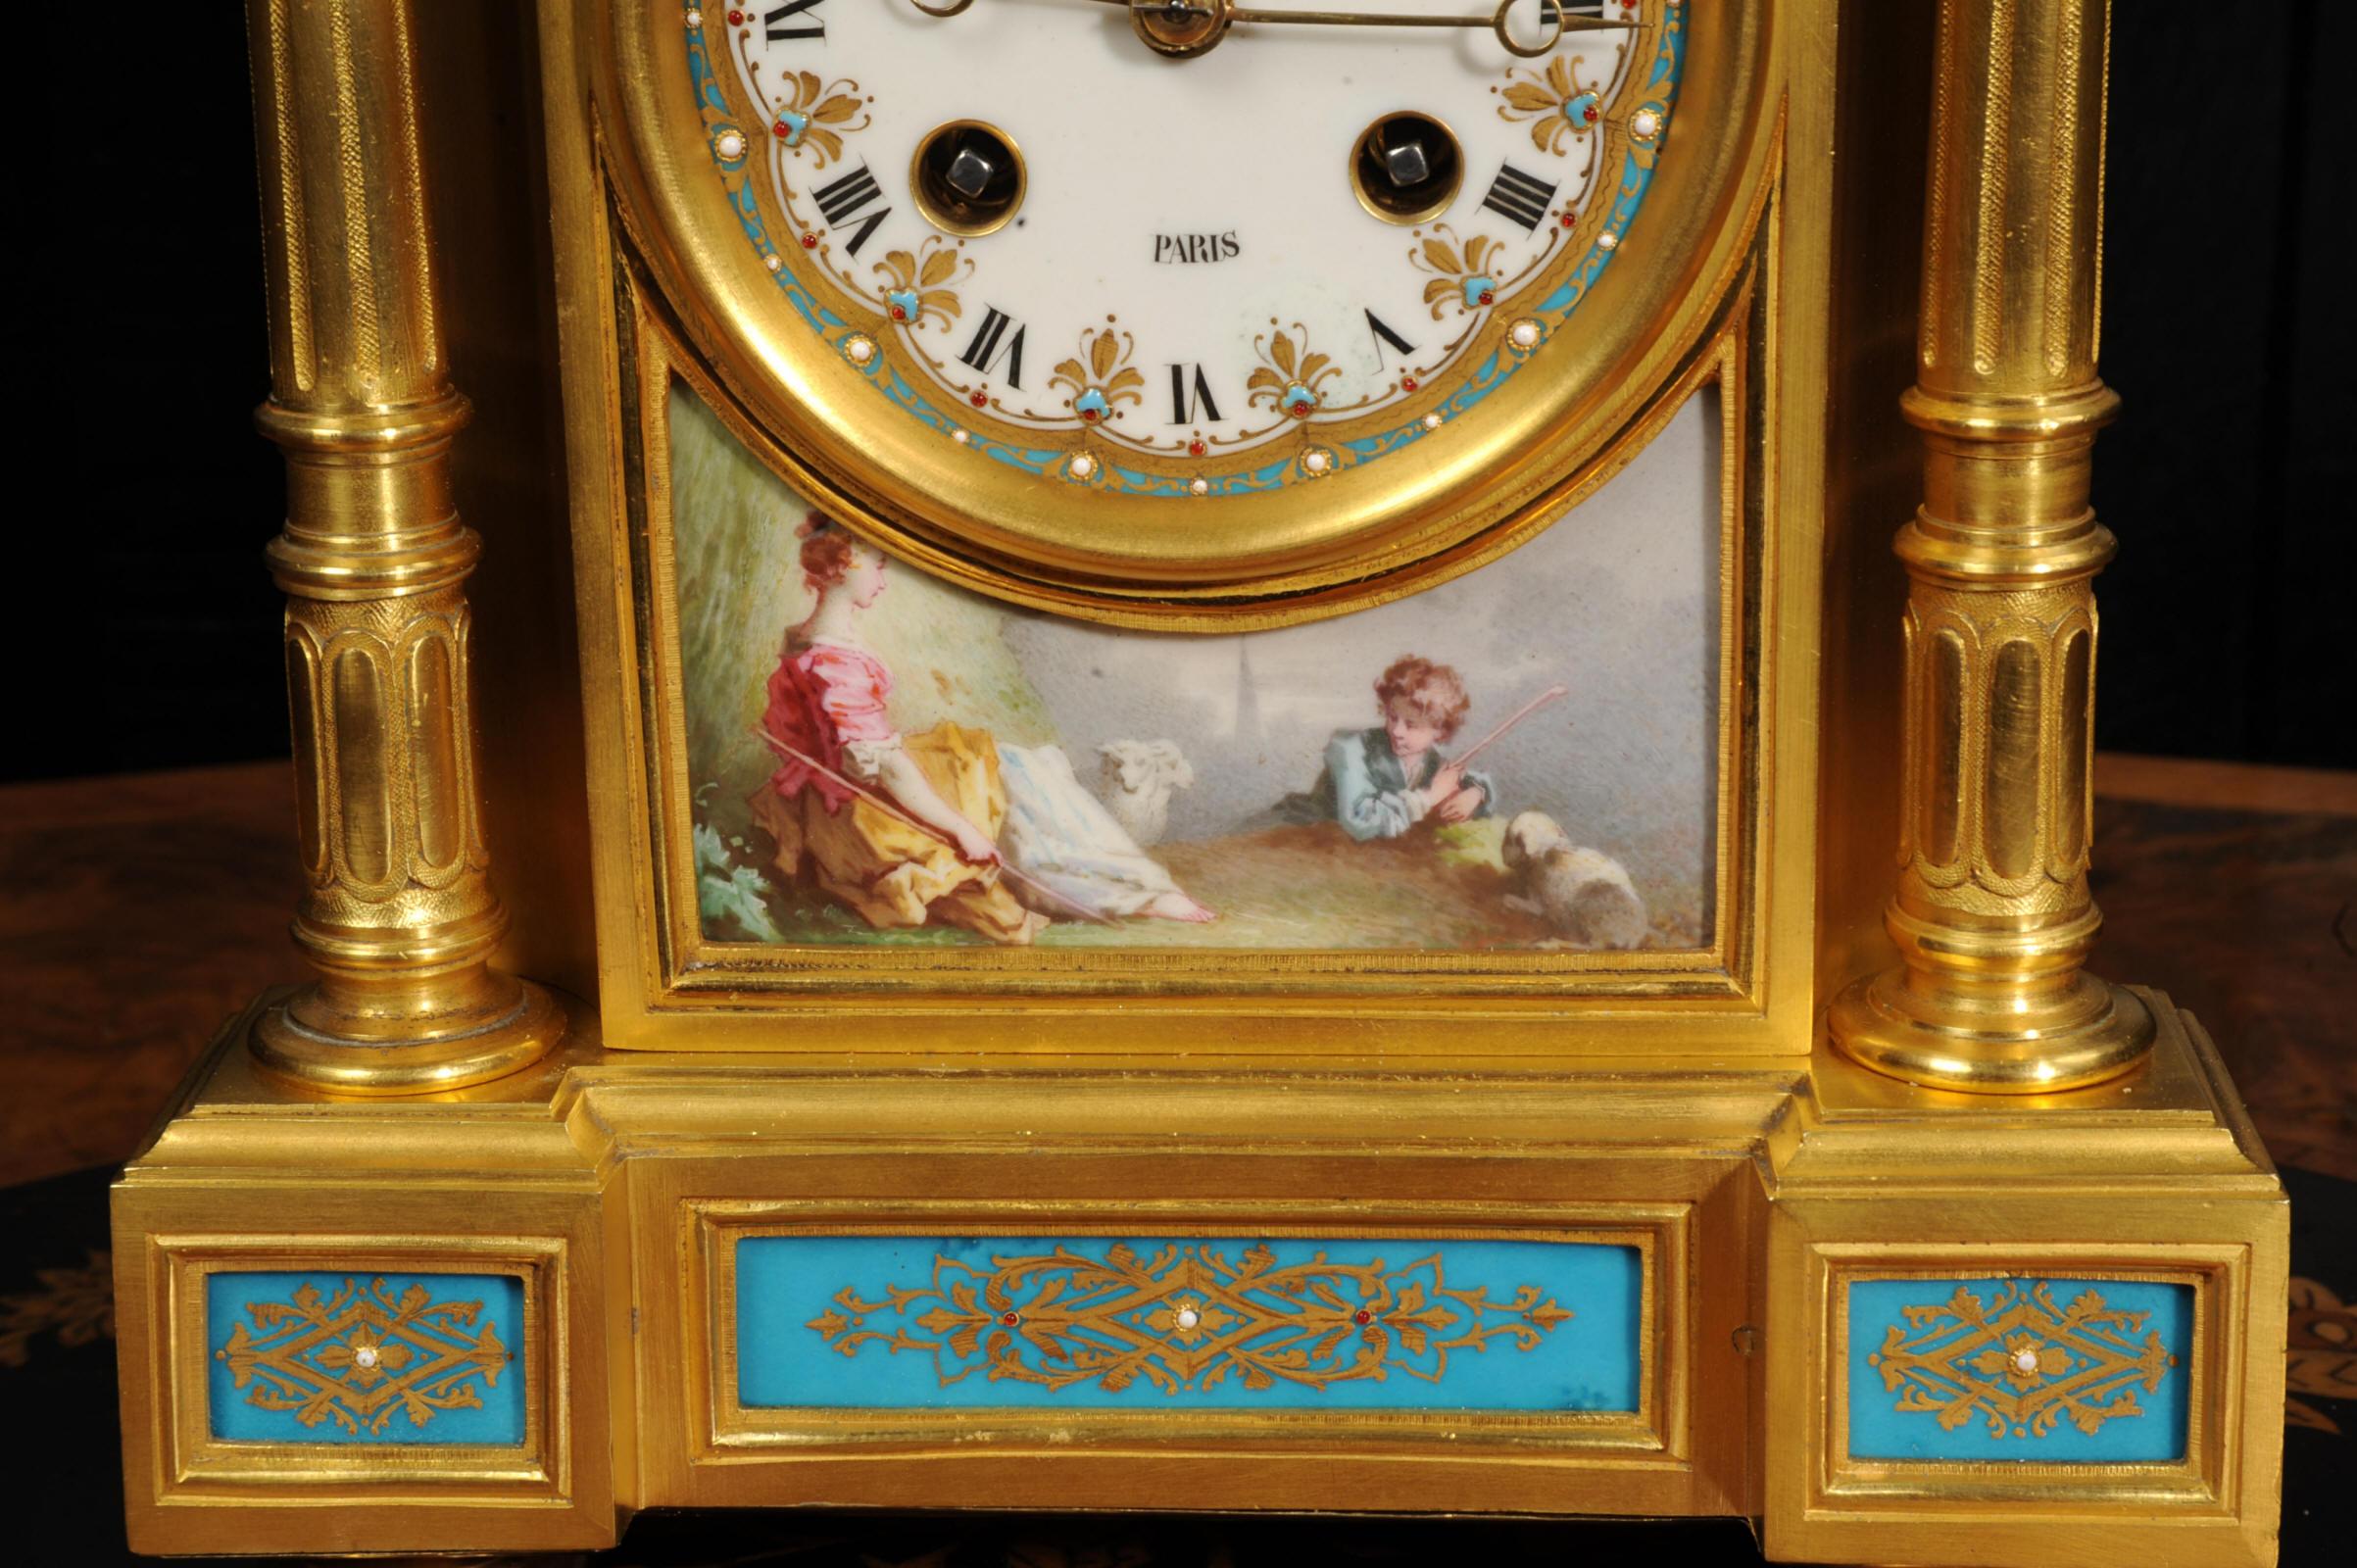 Fine and Early Sevres Porcelain and Ormolu Antique French Clock For Sale 8